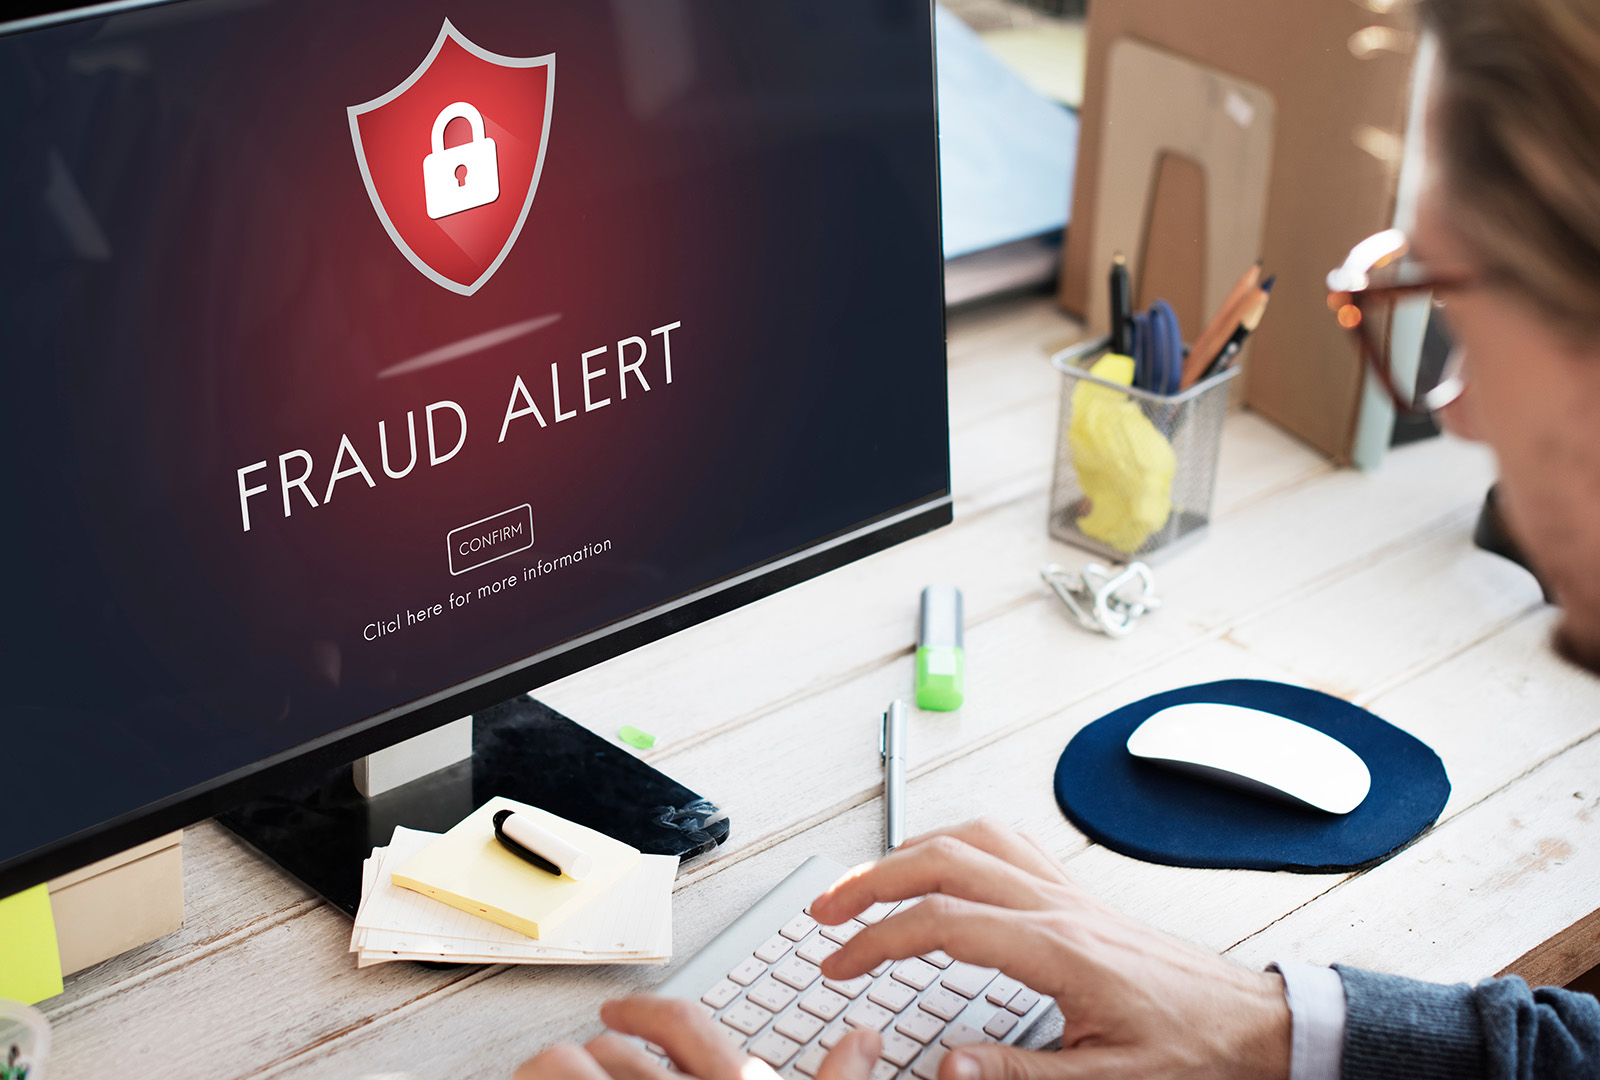 The fraud alert on the computer